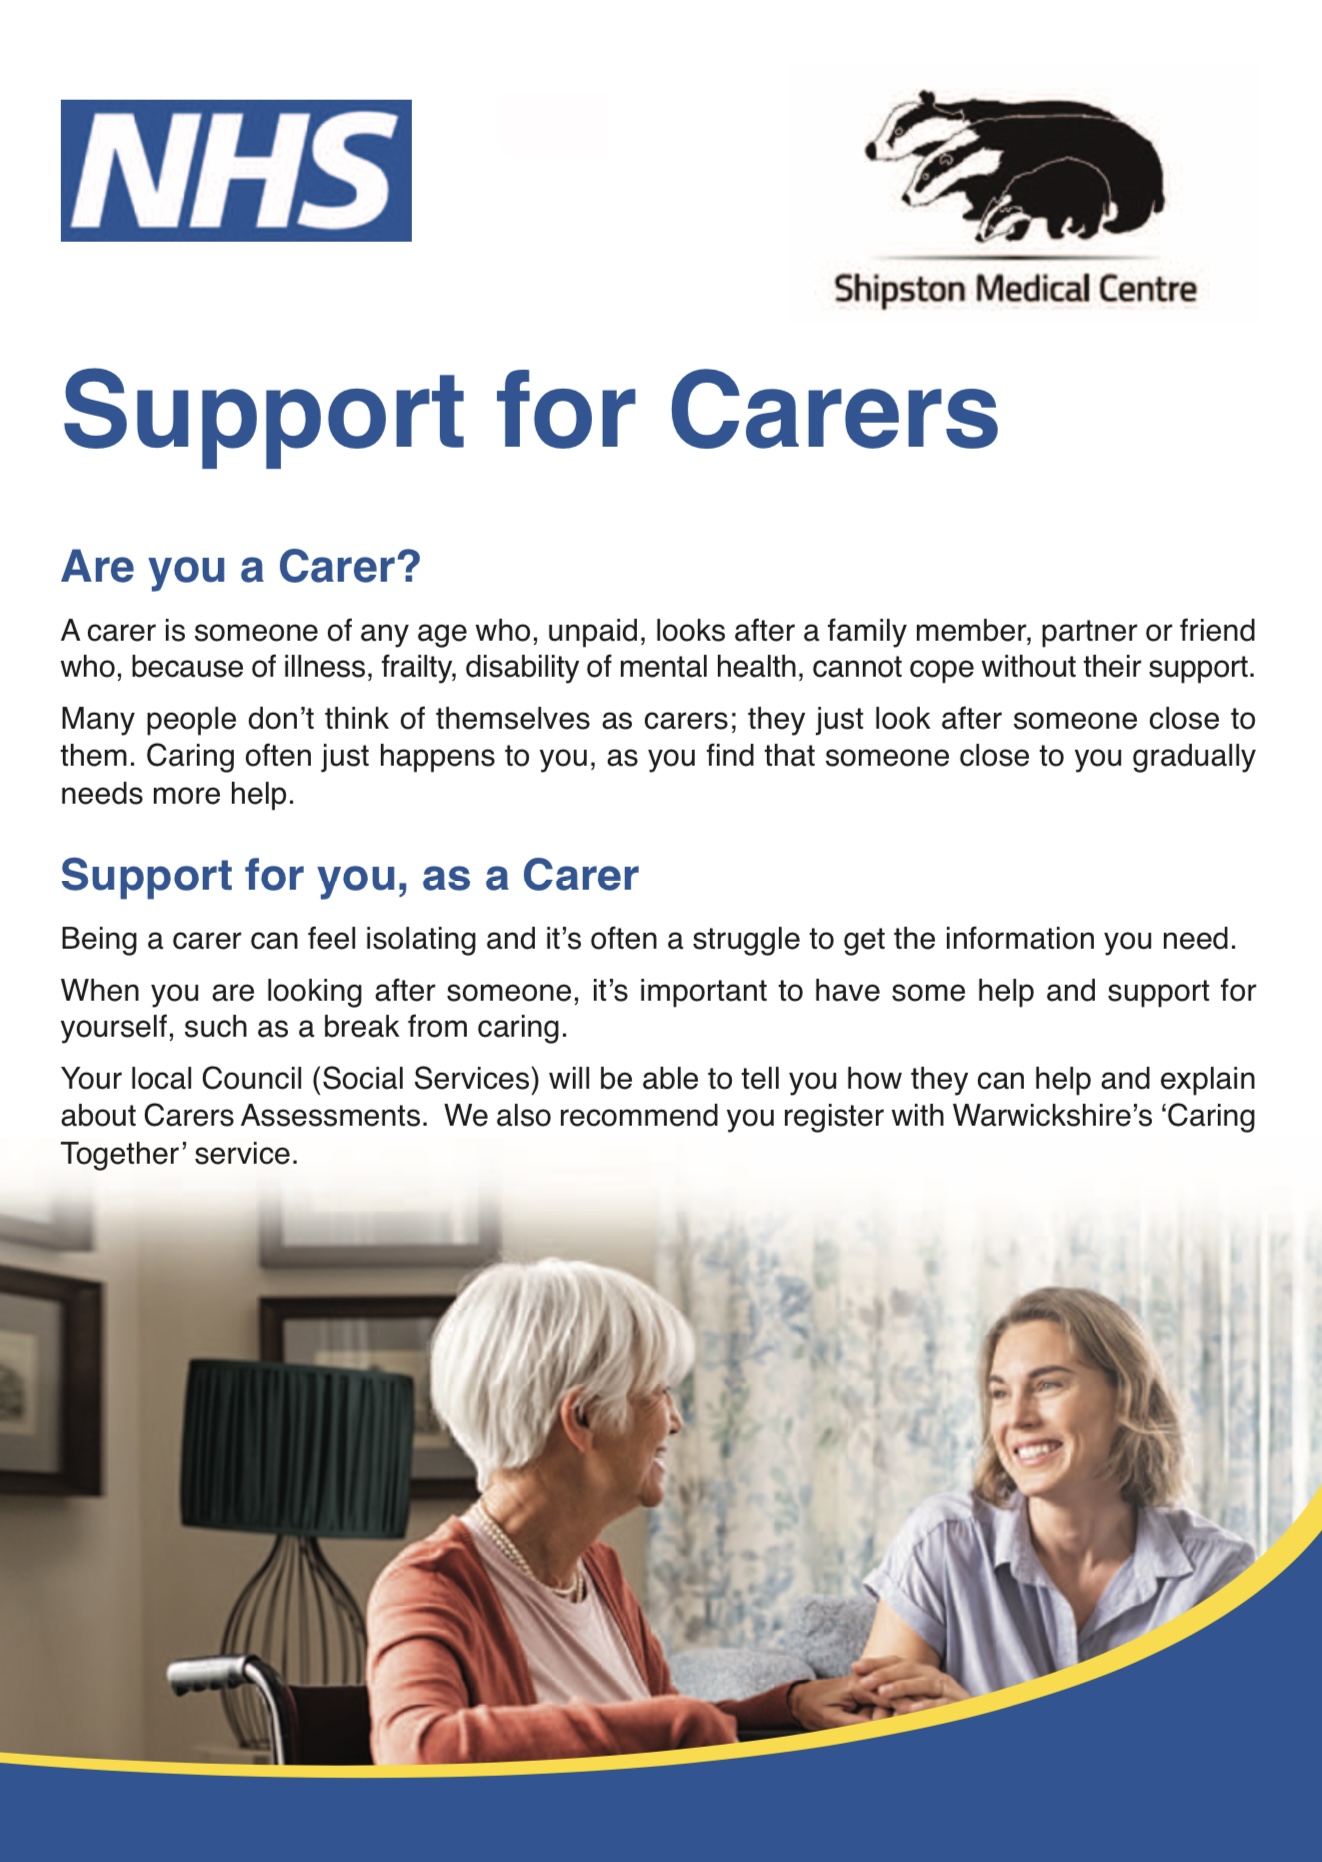 Shipston Medical Centre - Support for Carers